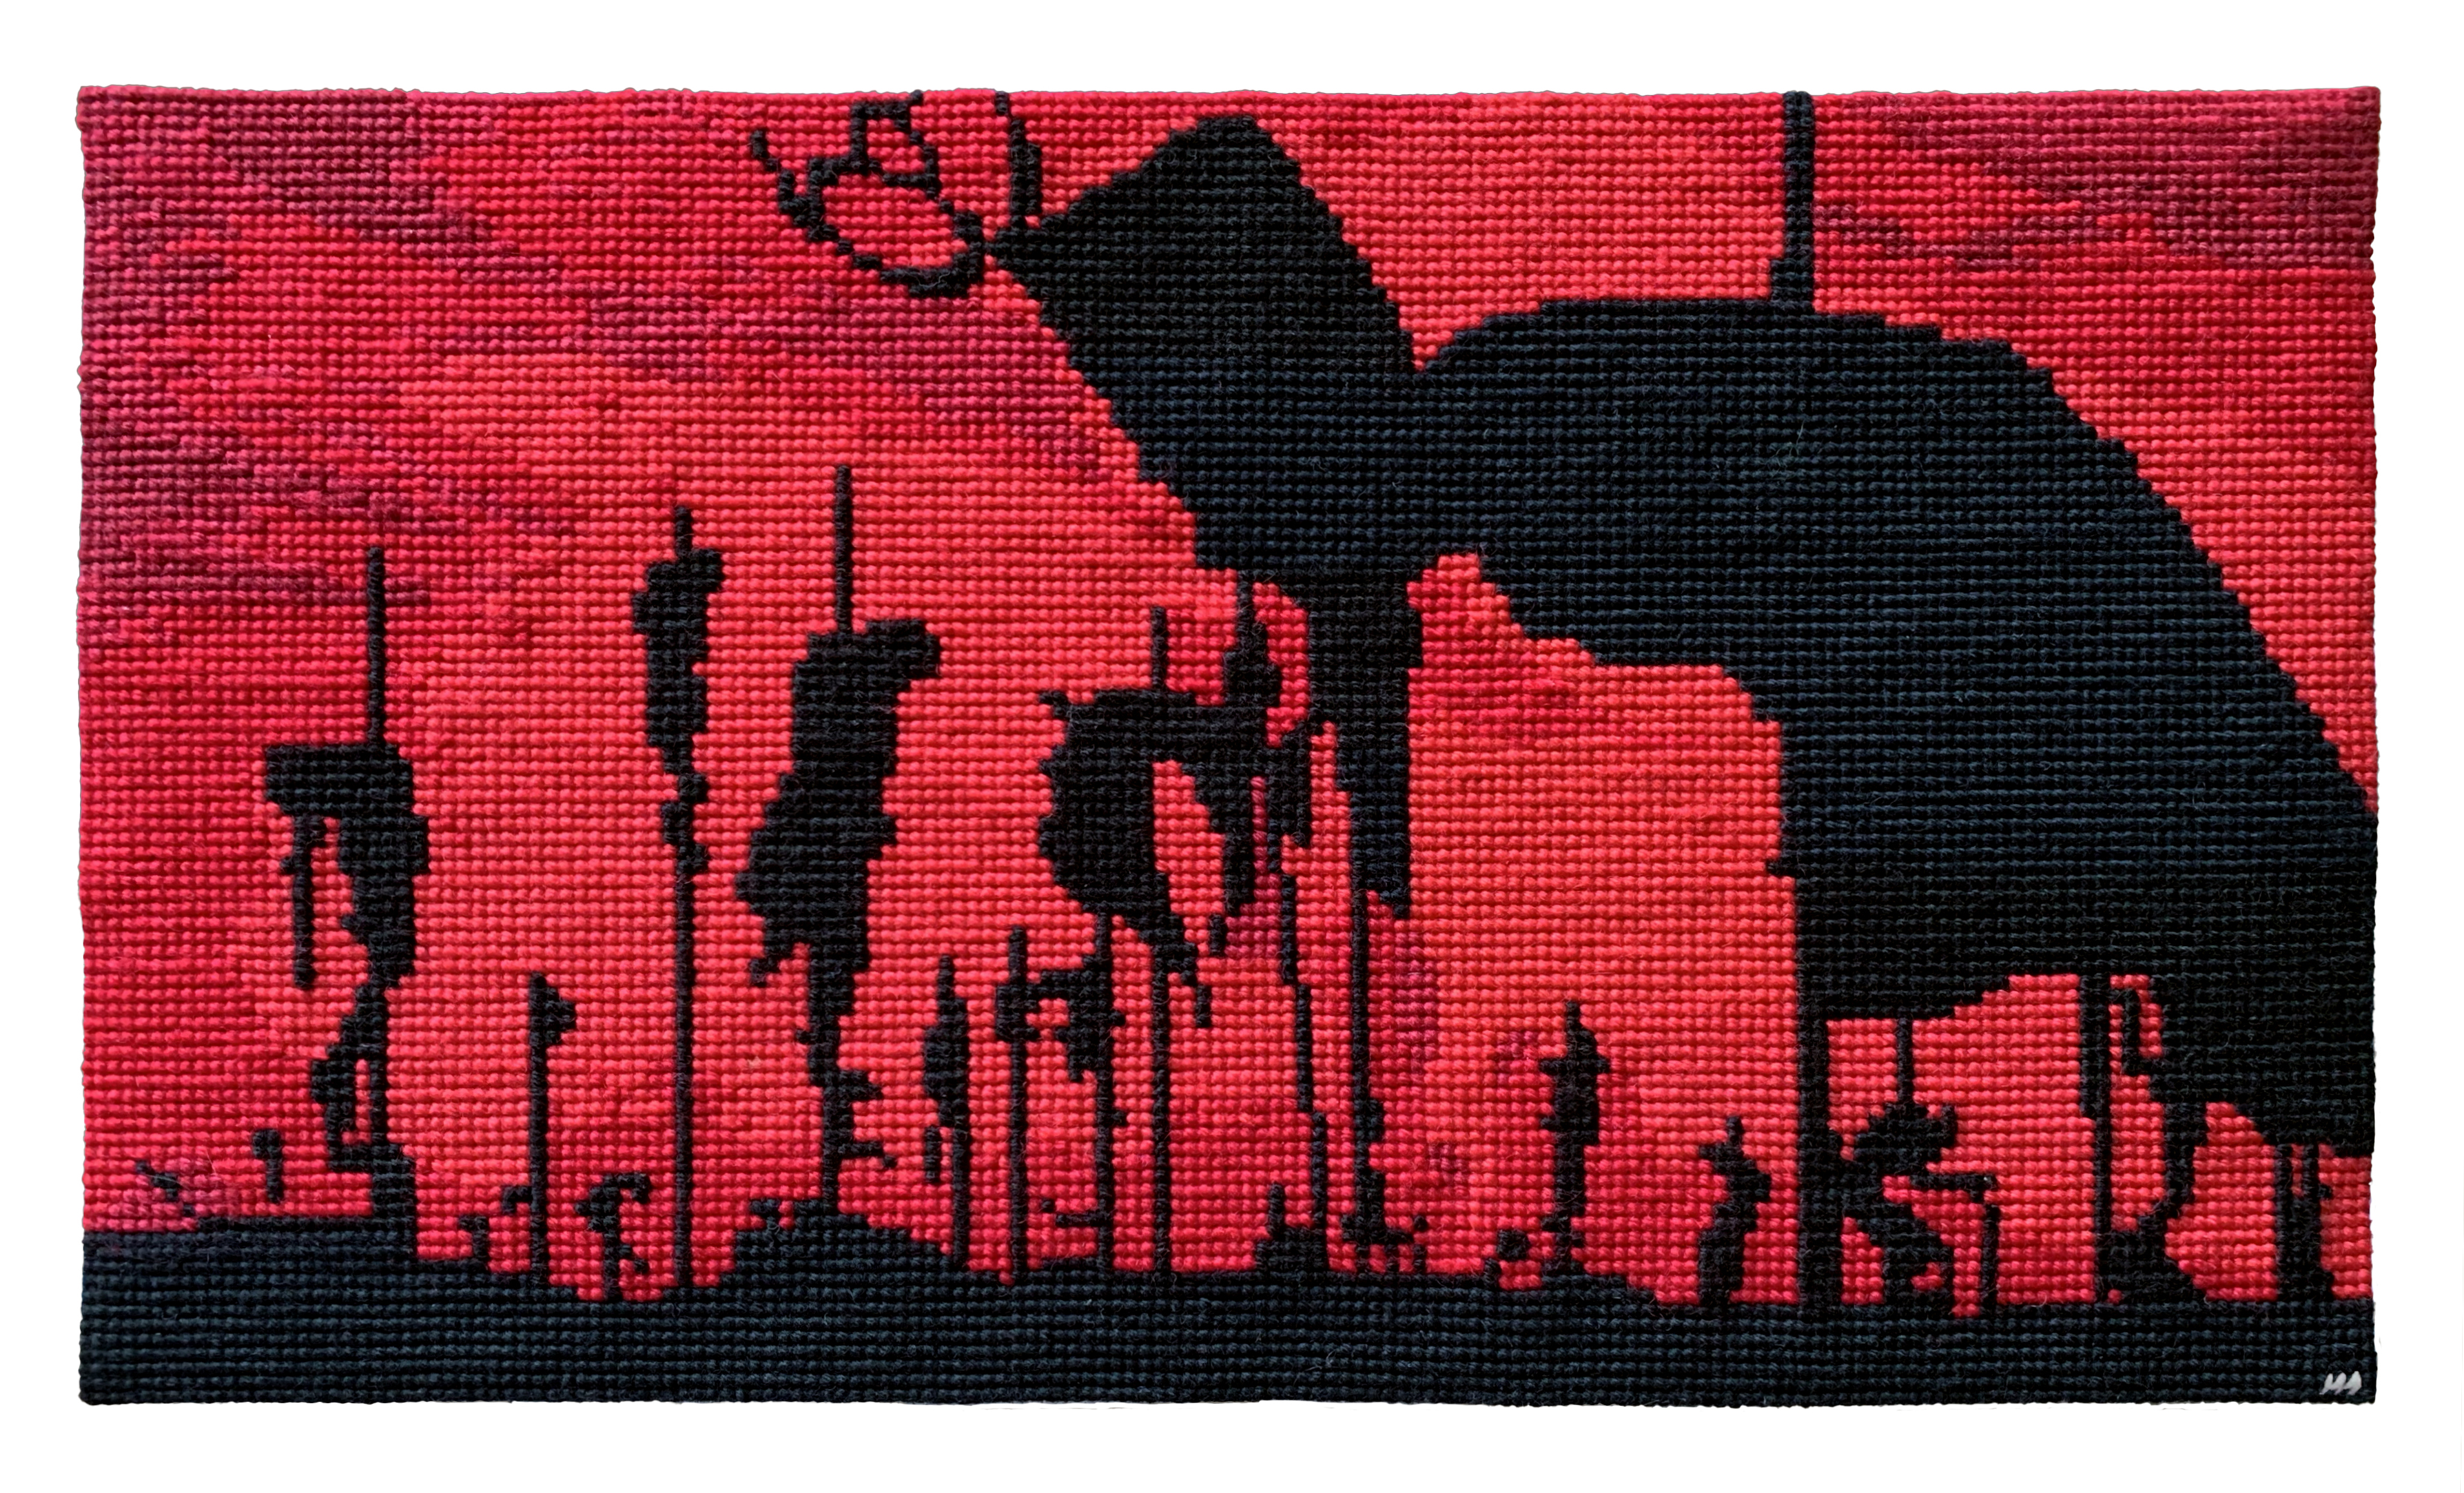  / Needlepoint of a scene from Francis Ford Coppola’s film *Dracula*. Art by artist Marine Beaufils.